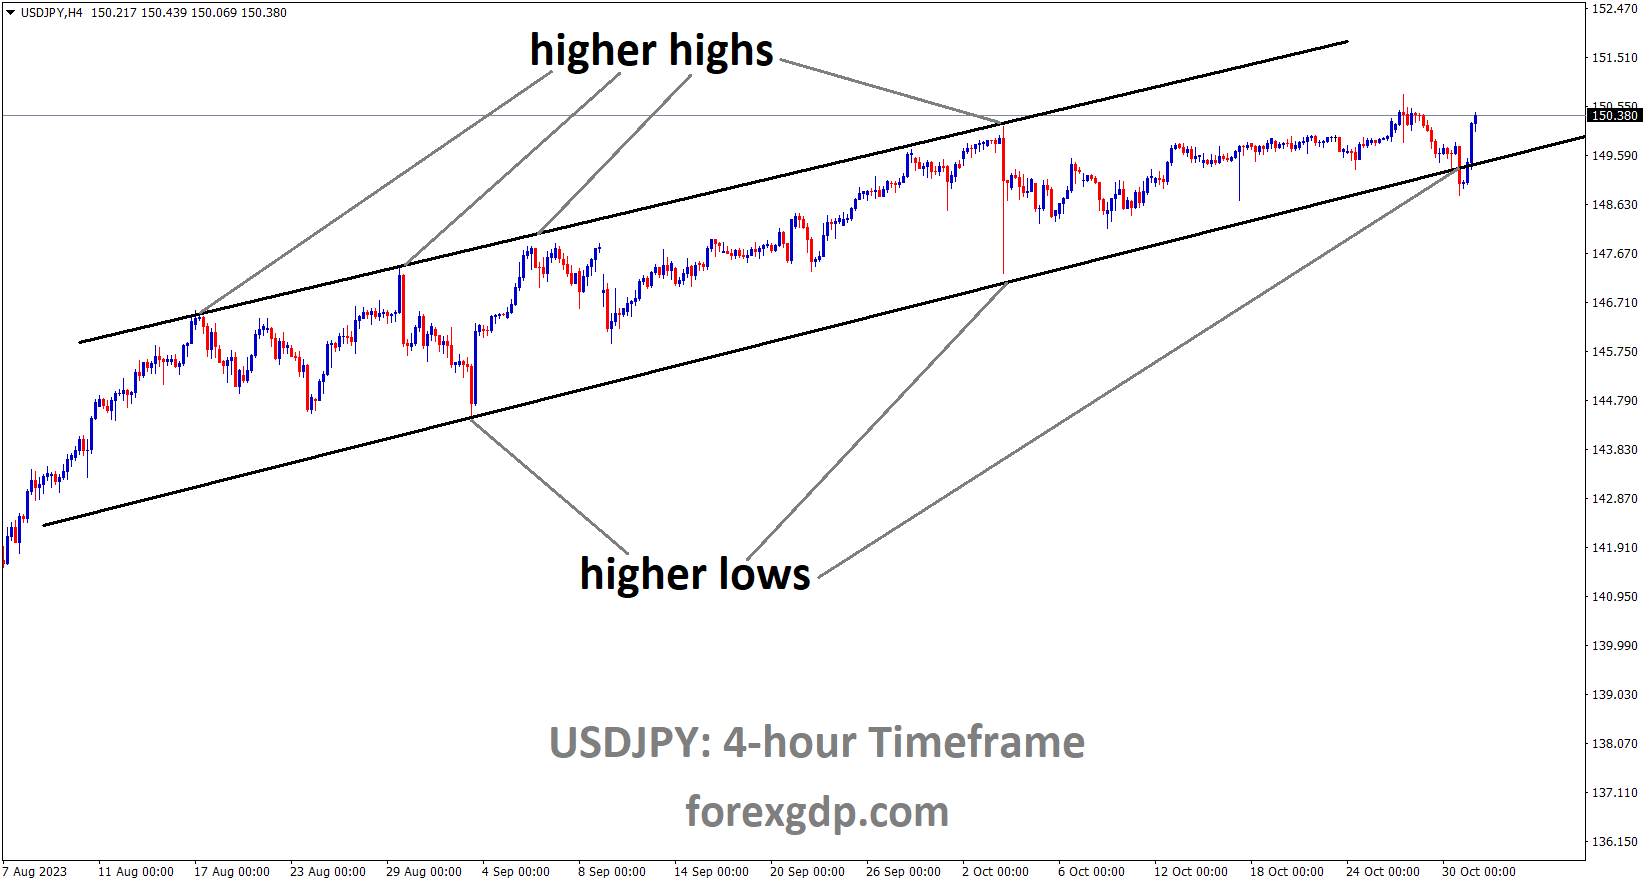 USDJPY is moving in an Ascending channel and the market has rebounded from the higher low area of the channel